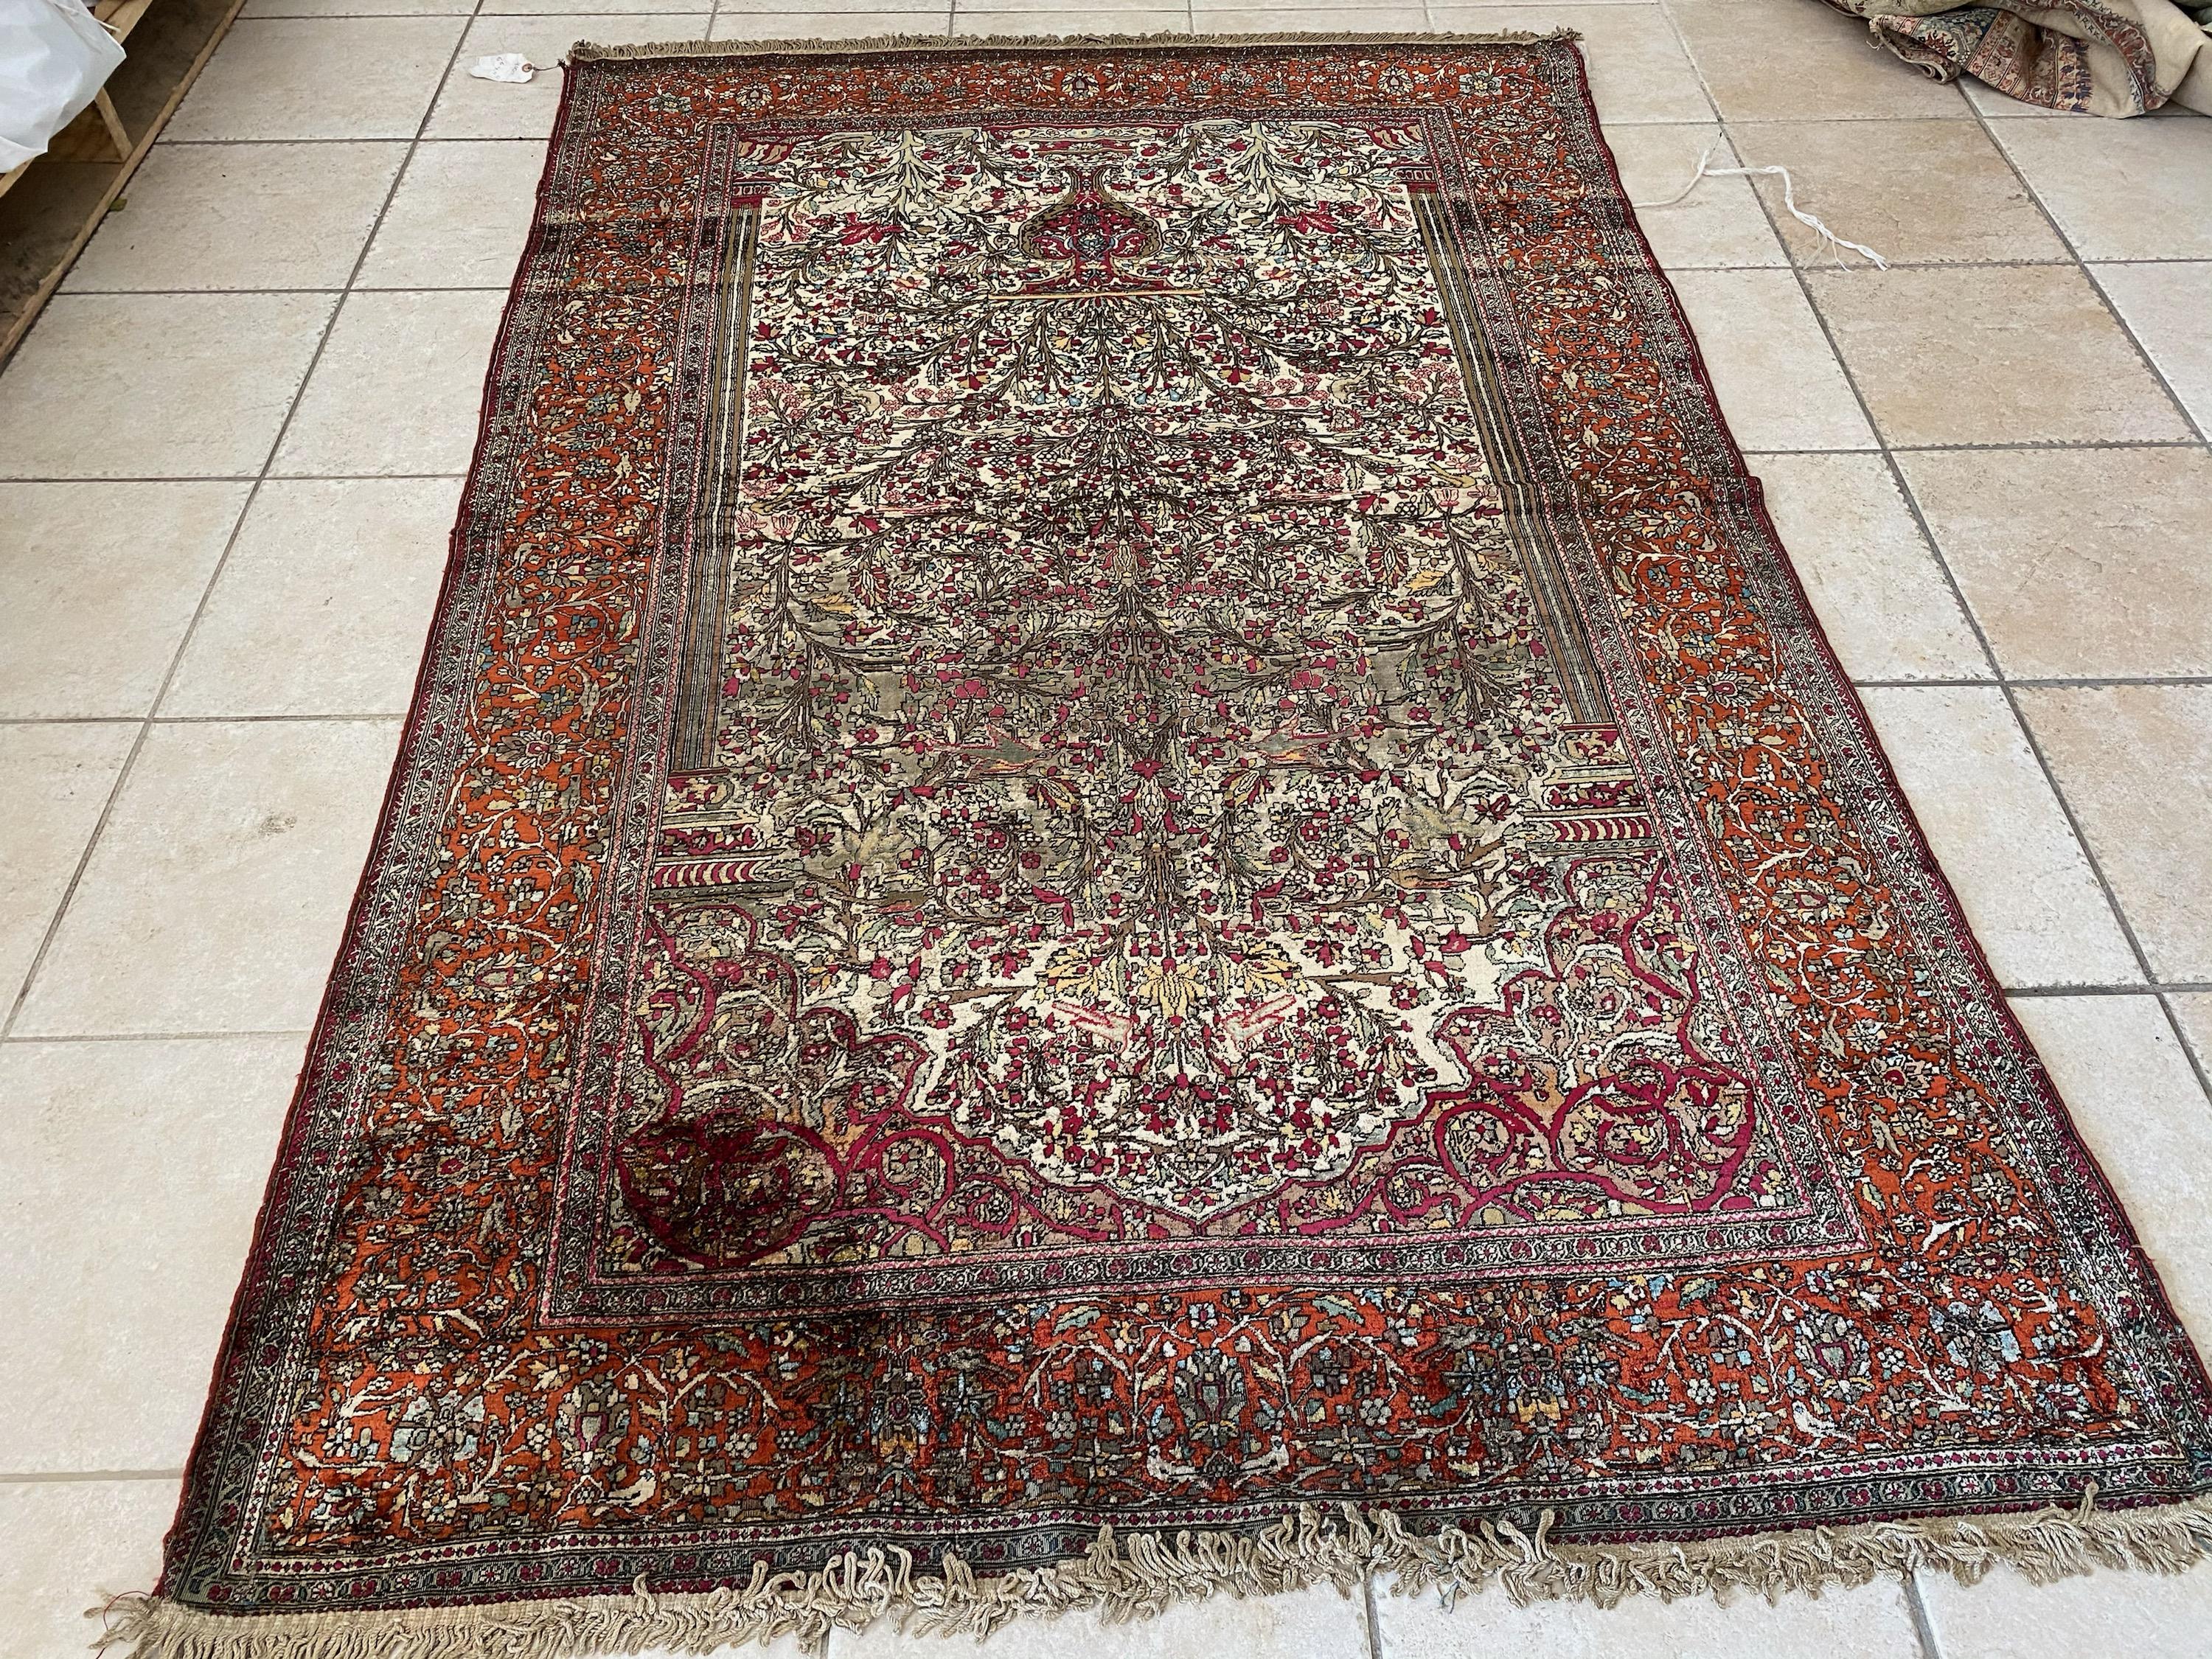 Antique Persian Red and Ivory Floral Silk Mohtasham Kashan Rug c. 1850-1880 In Good Condition For Sale In New York, NY